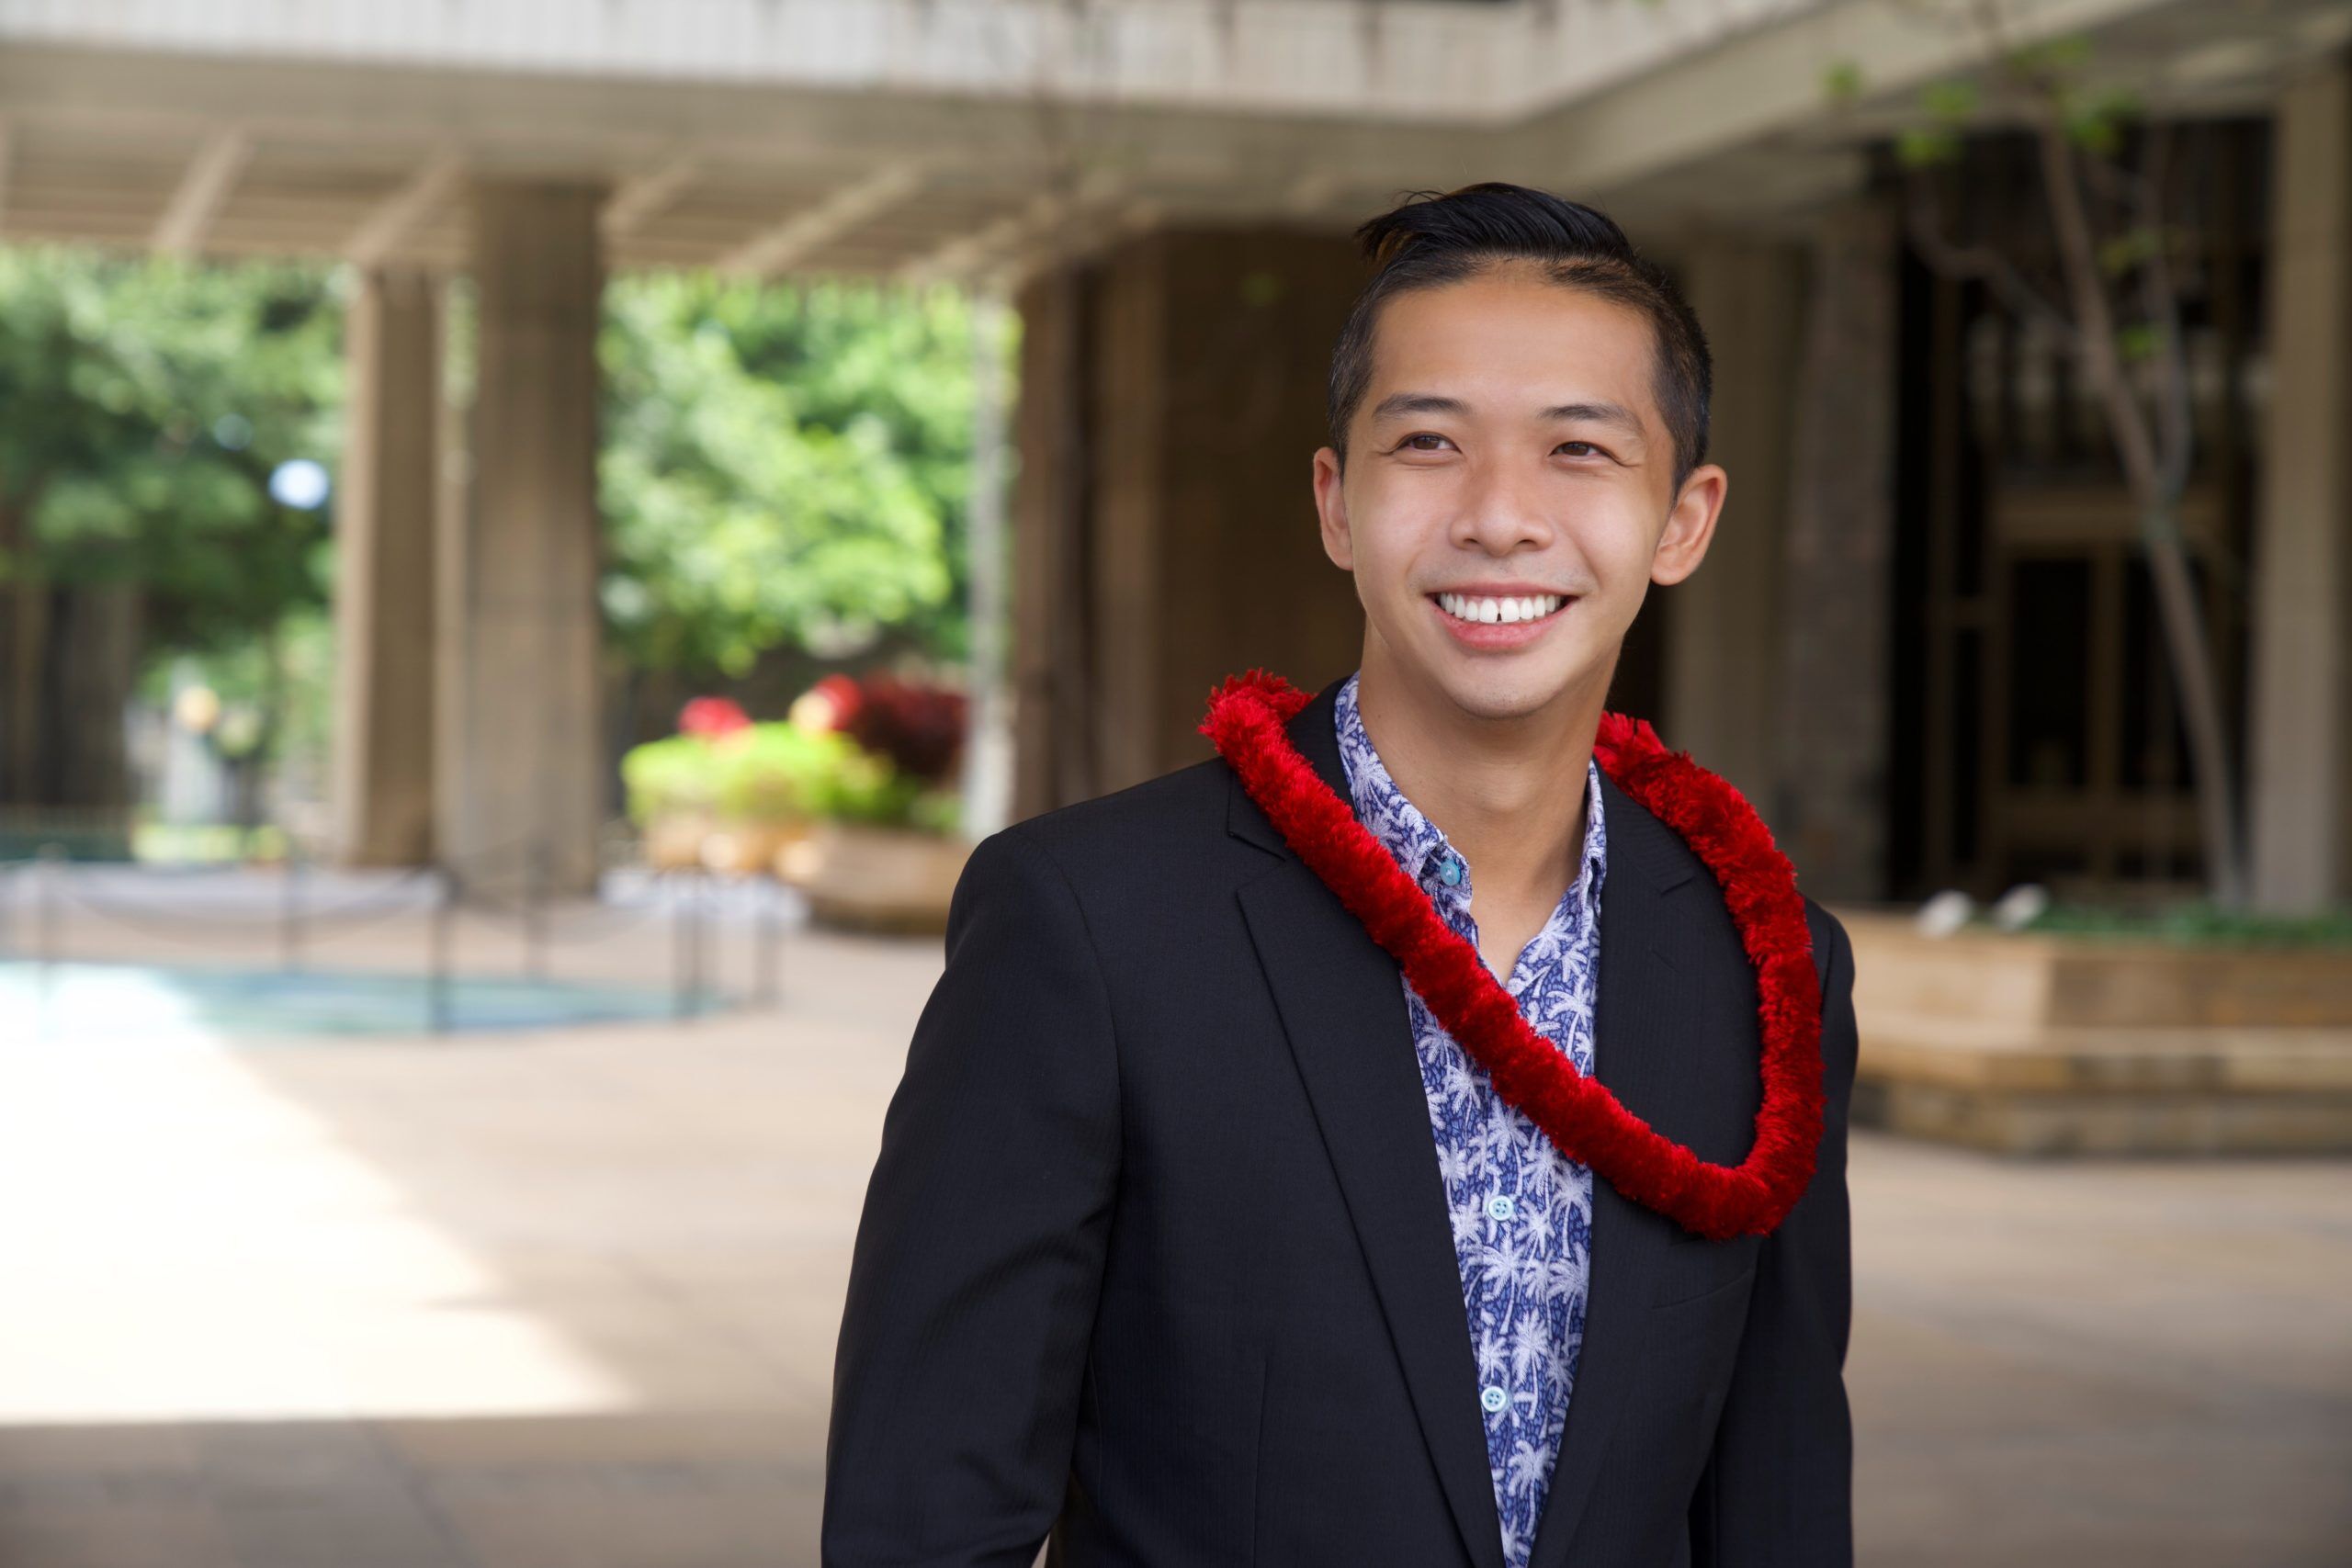 Adrian Tam is on his way to becoming the only out LGBTQ elected official in Hawaii